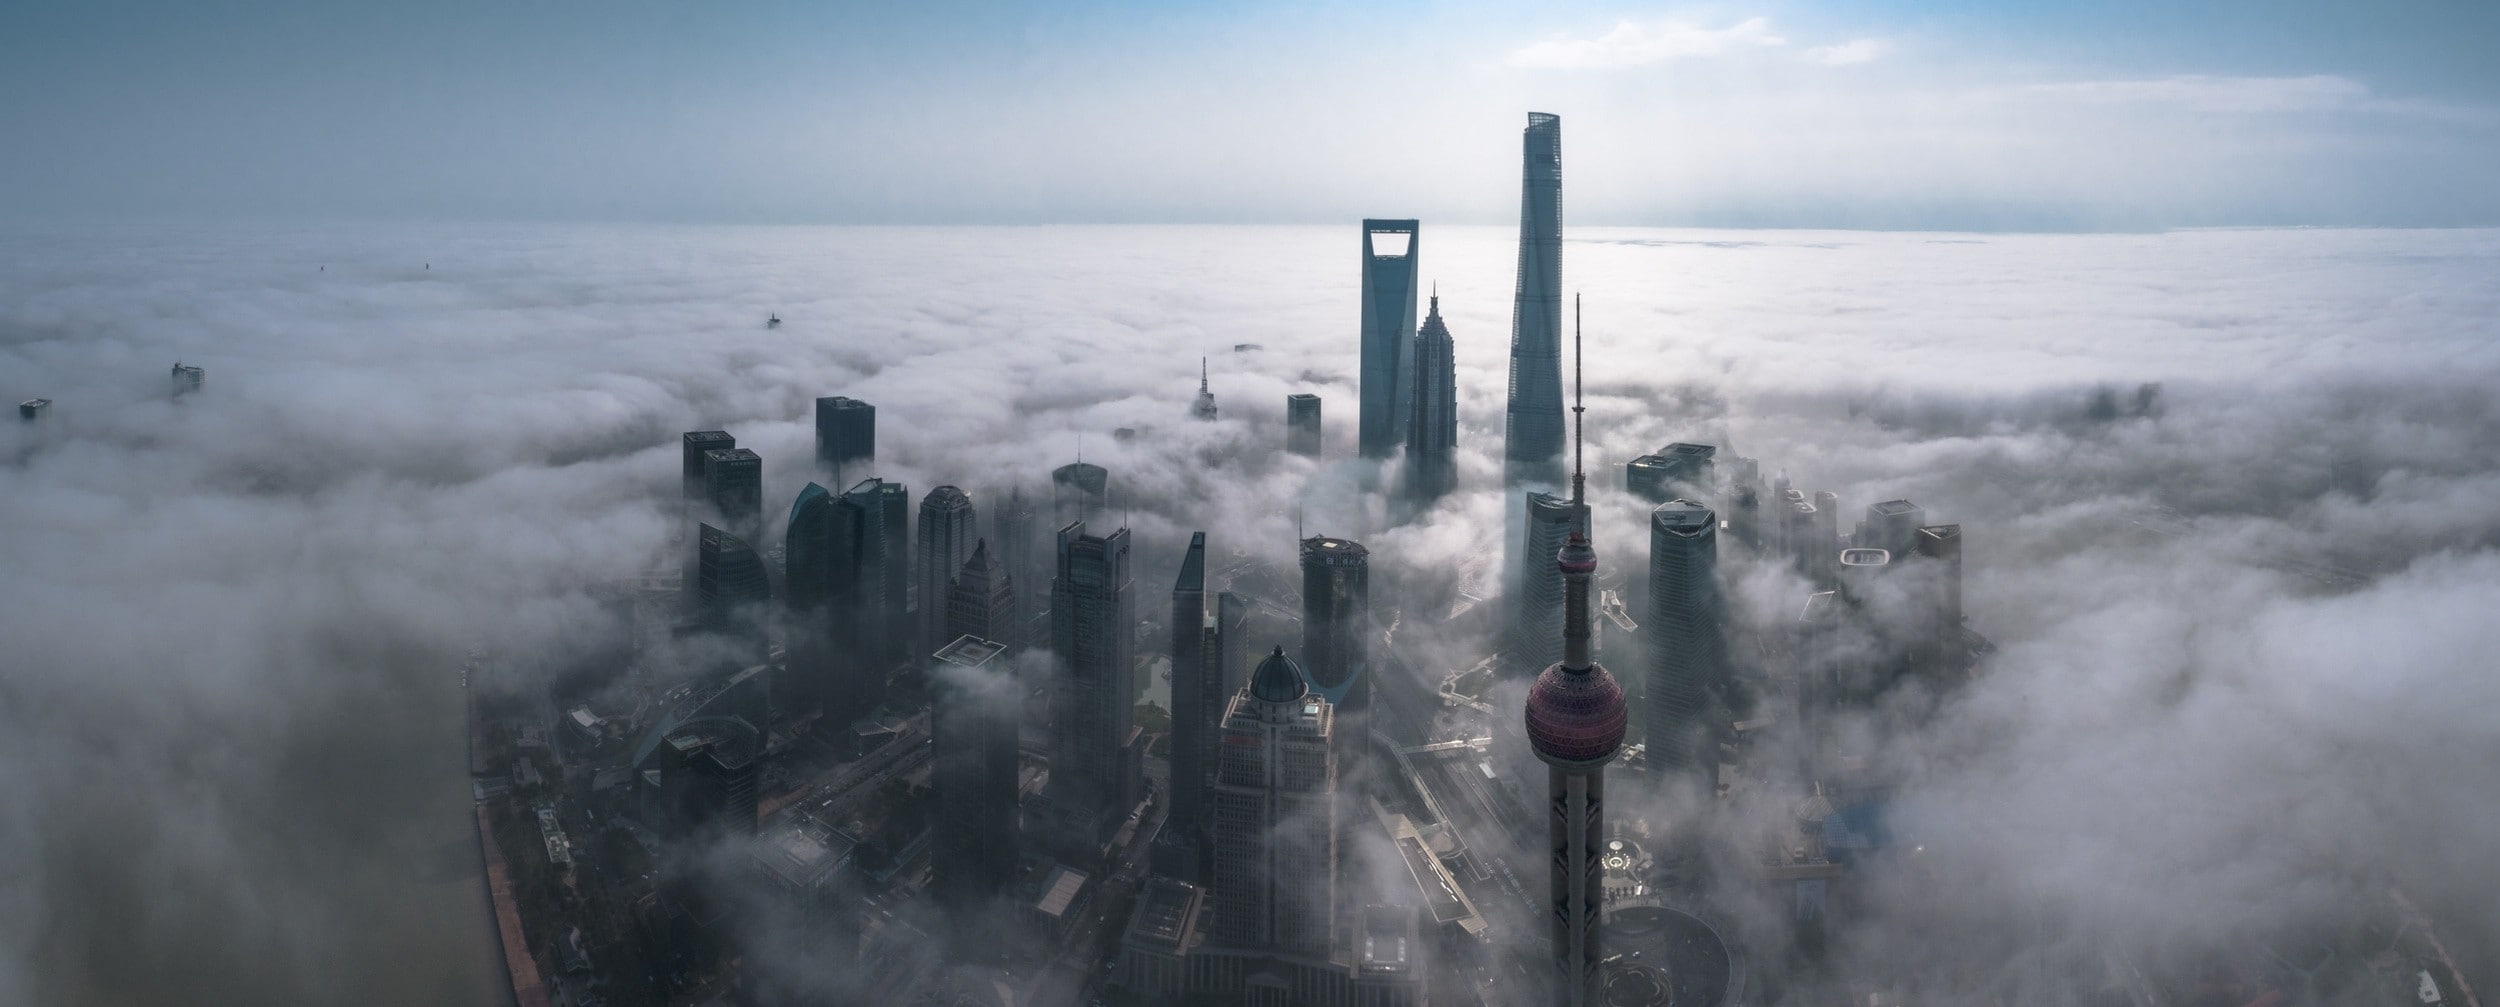 morning, aerial view, photography, mist, sunlight, skyscraper